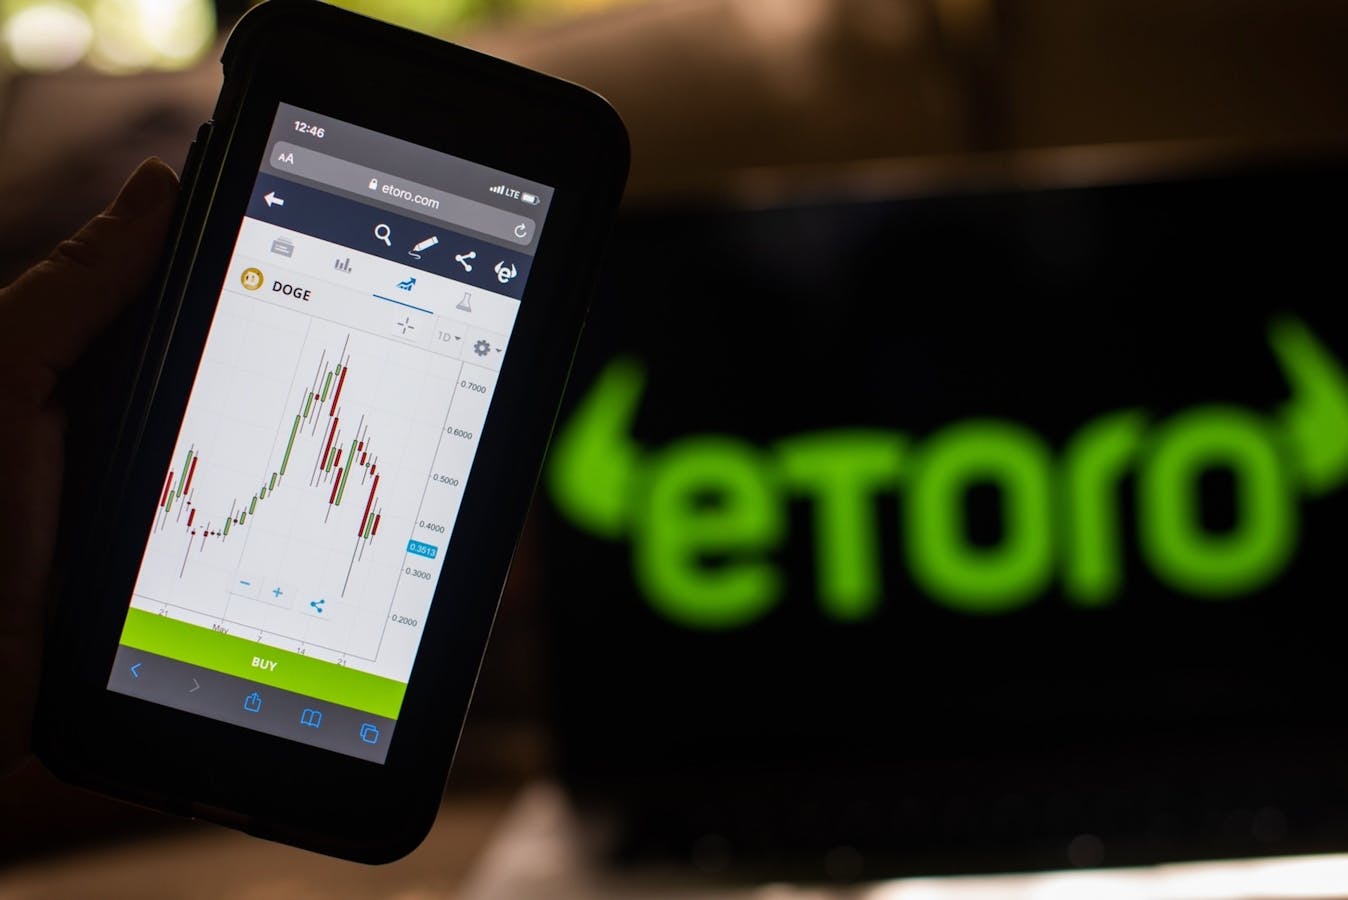 Etoro is among the crypto companies planning to go public via a SPAC this year. Photo: Bloomberg 